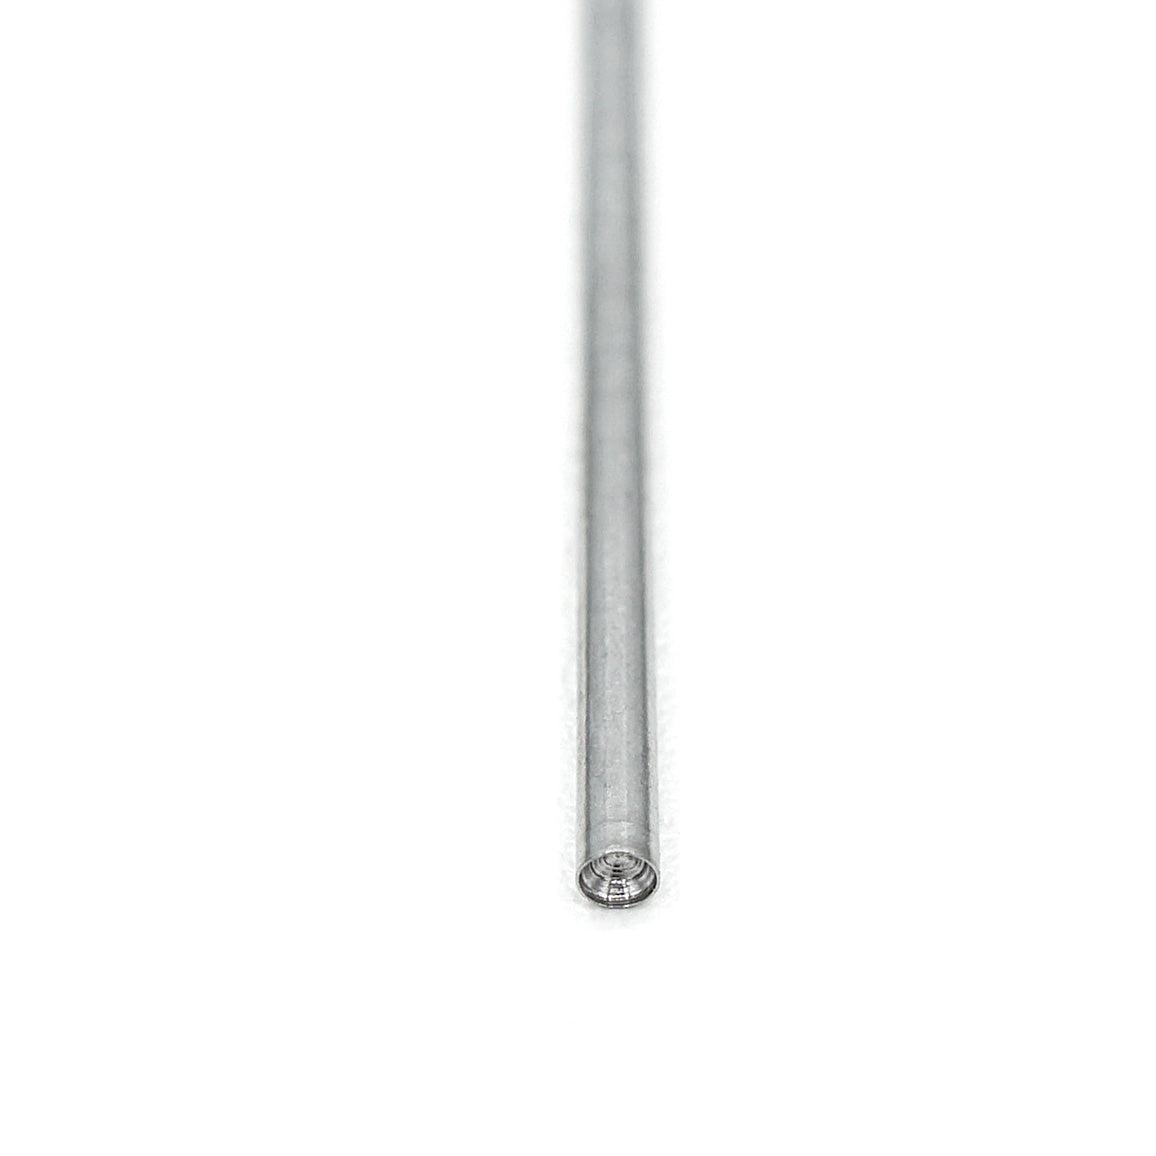 Stiletto Piercing Tapers - 12G - Piercing Tapers - FYT Tattoo Supplies New York